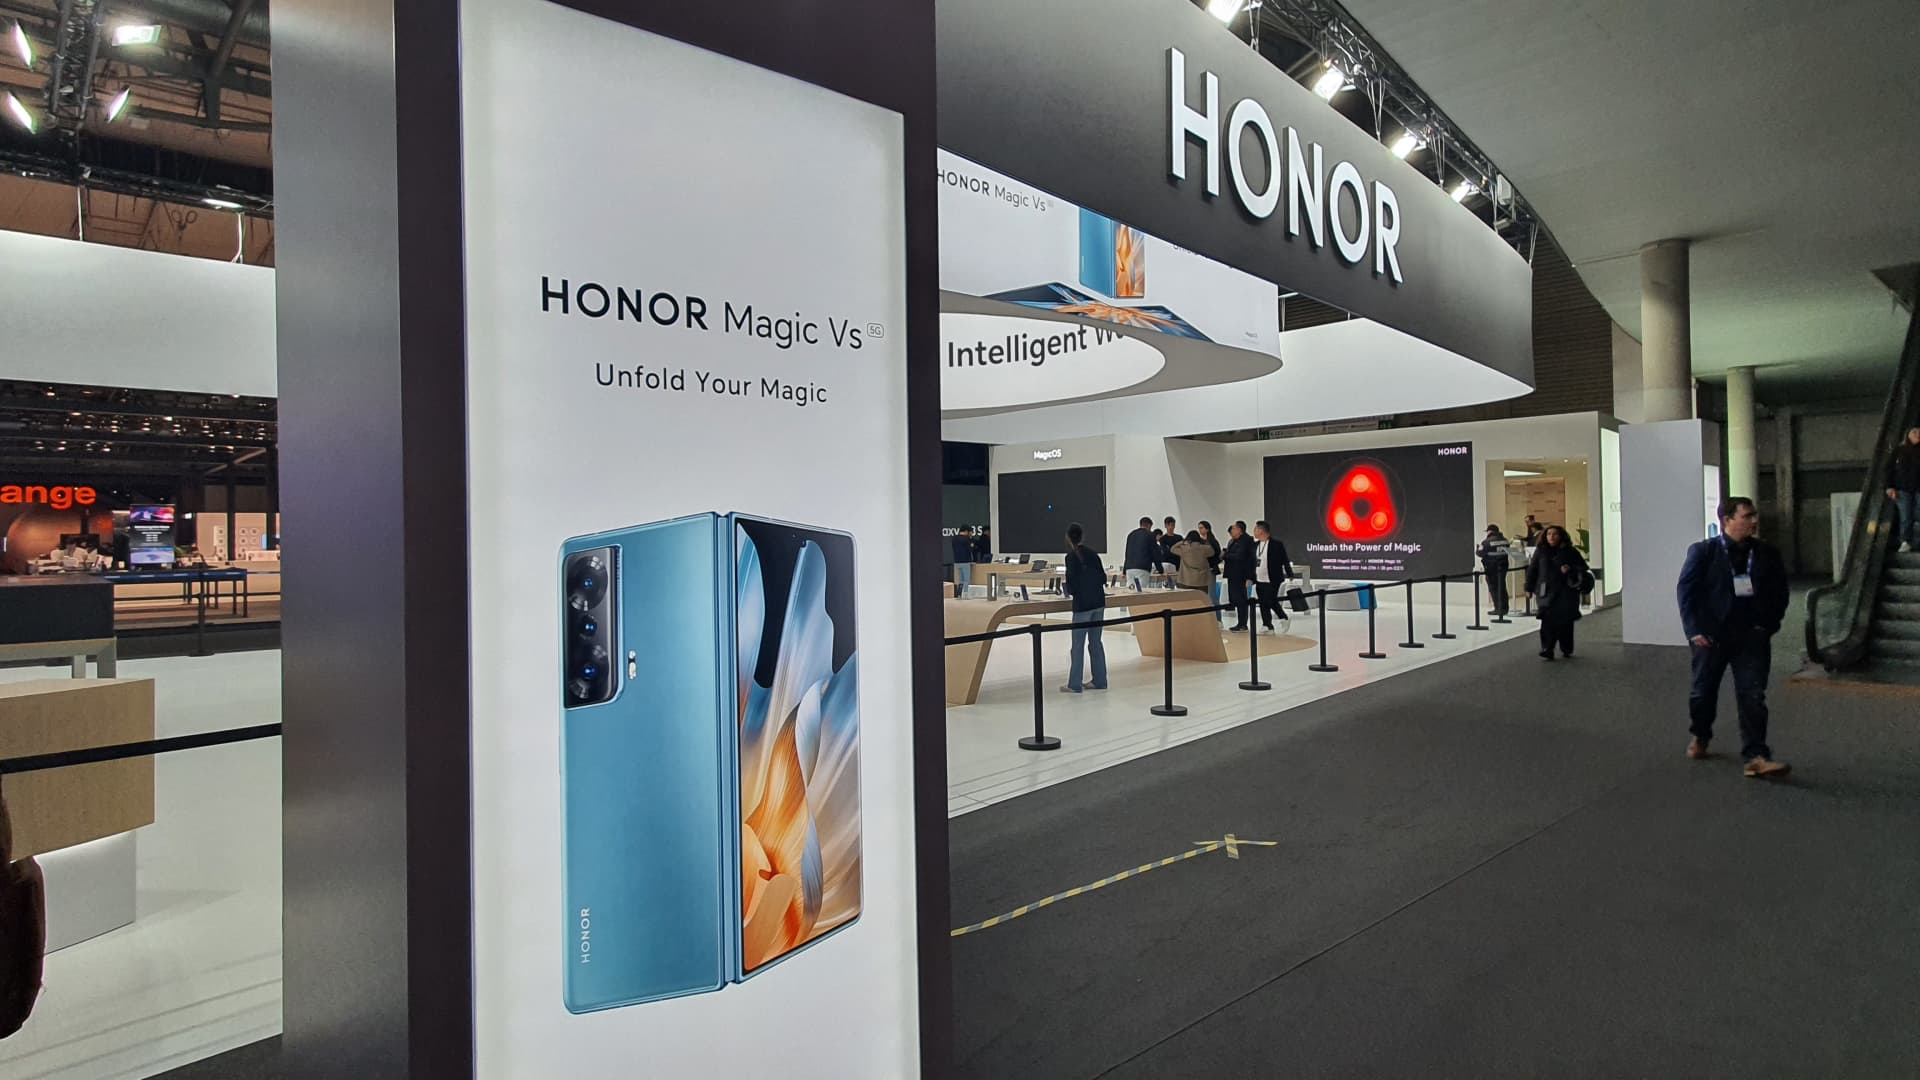 Honor presented a big stand at Mobile World Congress in Barcelona, the world's biggest mobile show. The company showed off its latest flagship devices including the Magic Vs.